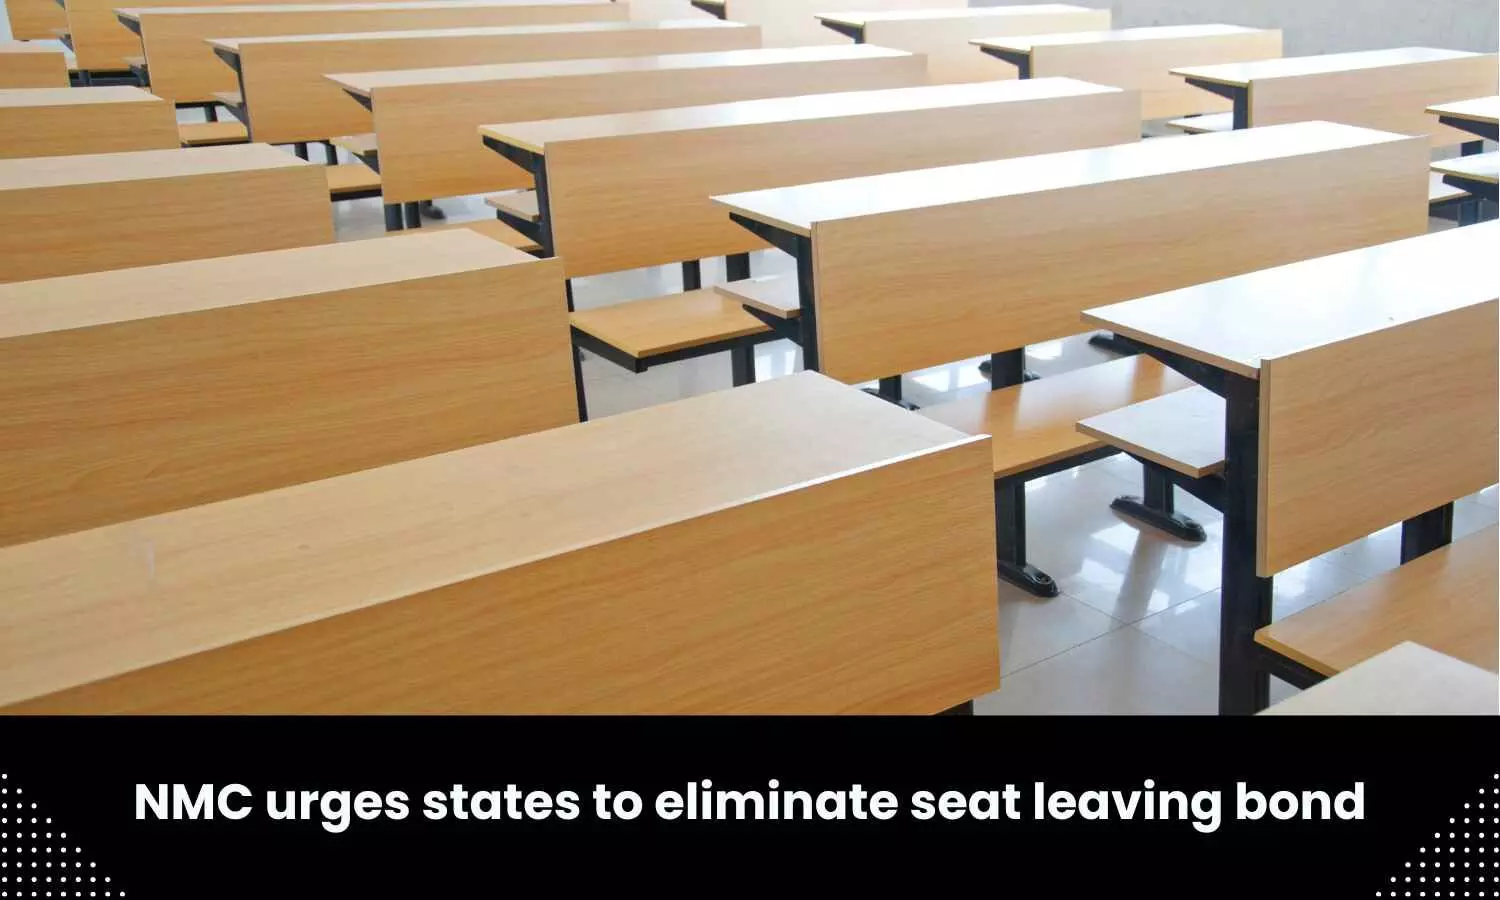 Do away with seat leaving bond: NMC asks States